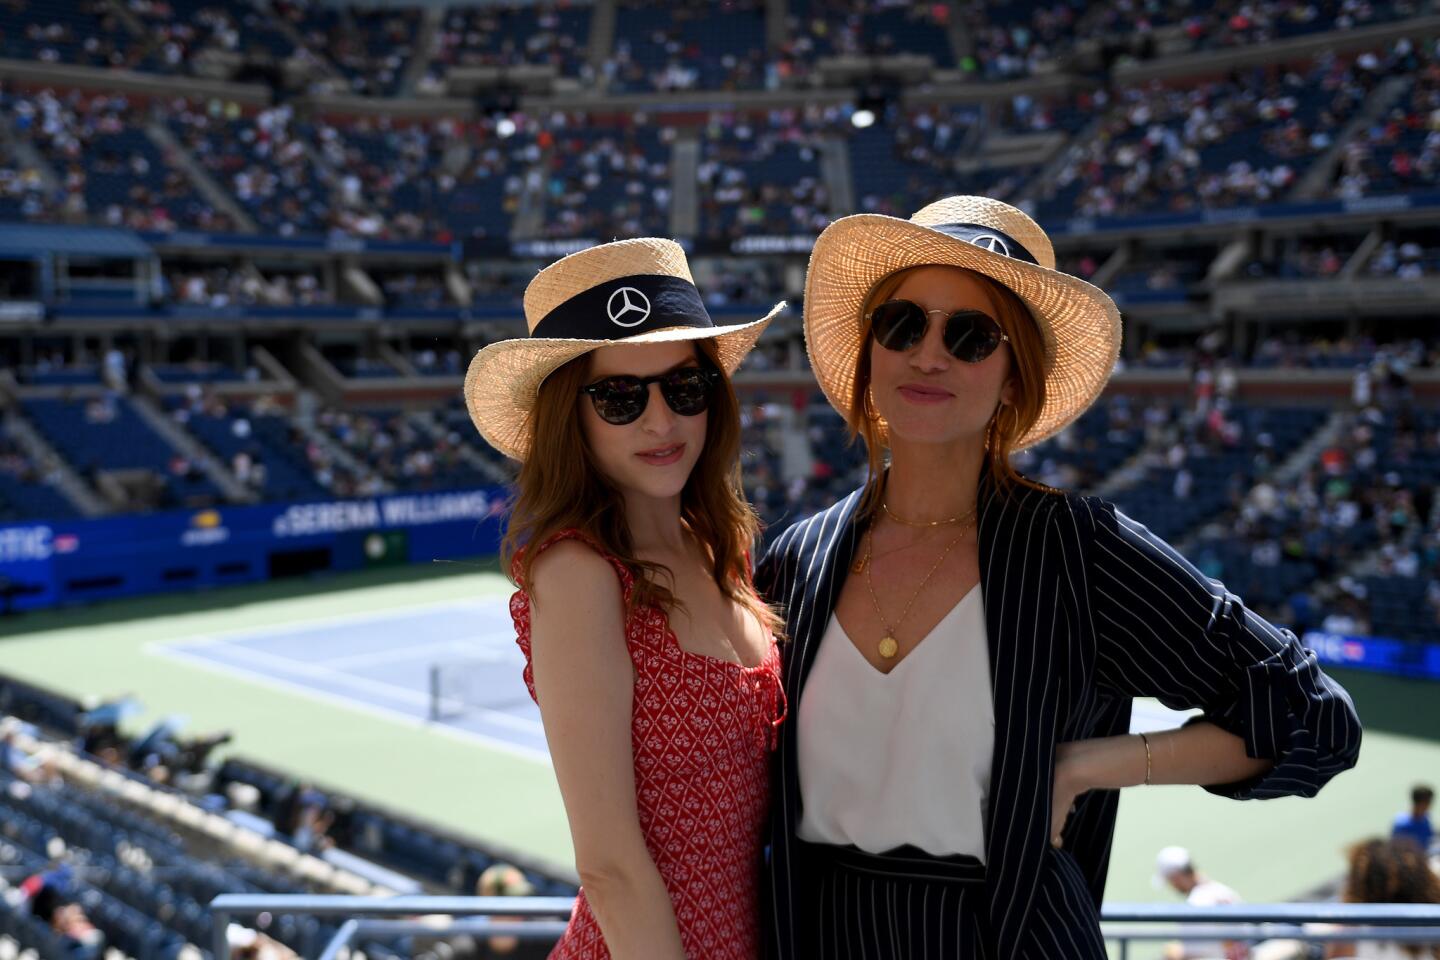 Actresses Anna Kendrick, left, and Brittany Snow enjoy The Mercedes-Benz VIP Suite at The 2019 U.S. Open at the USTA Billie Jean King National Tennis Center on Sept. 1, 2019, in Queens.